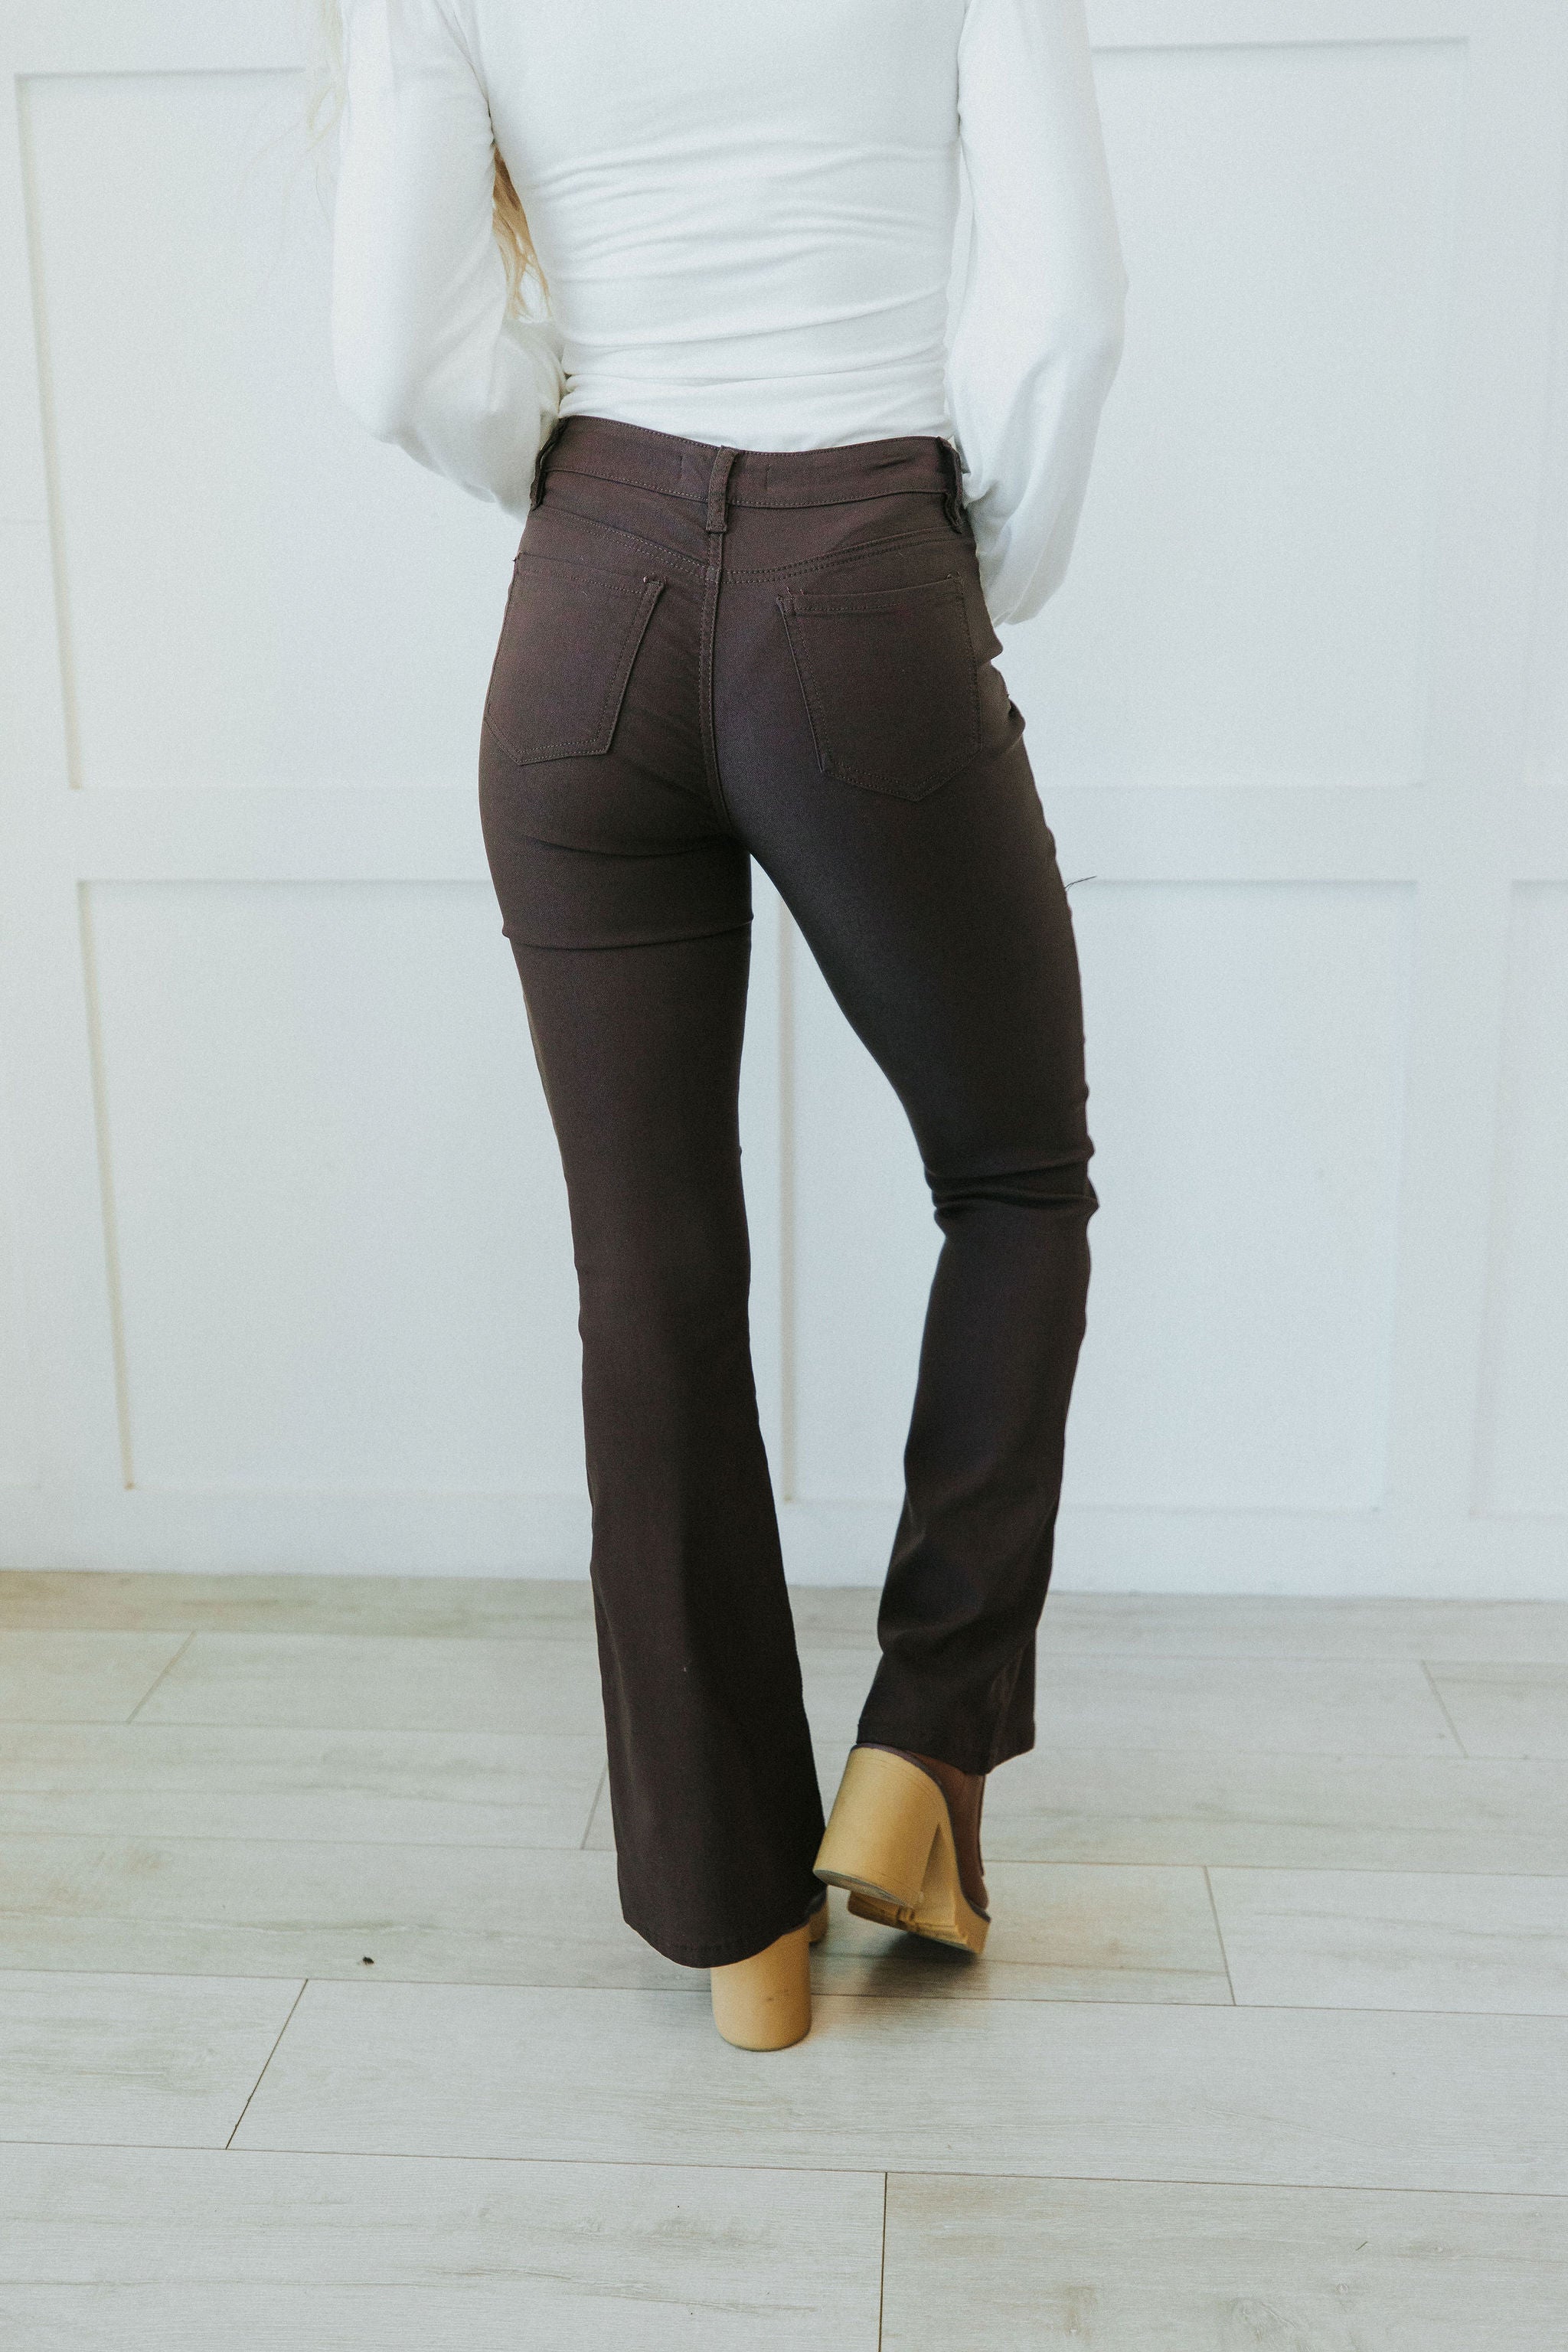 Magic In Your Step Flare Leg Jeans - Brown - Mulberry Skies